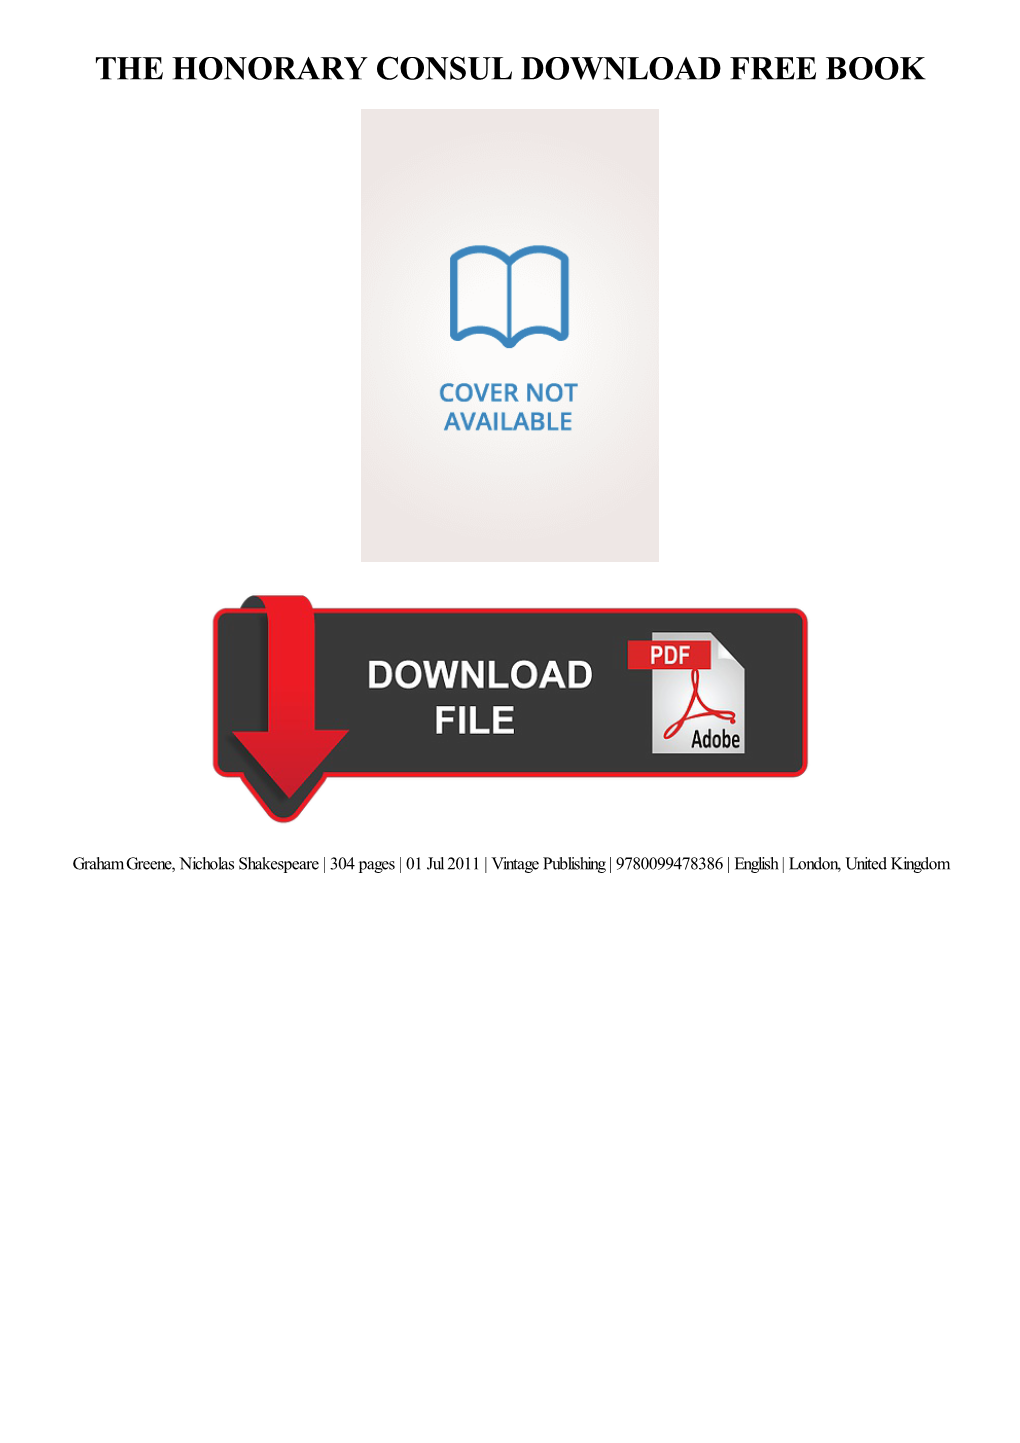 Download the Honorary Consul Free Ebook